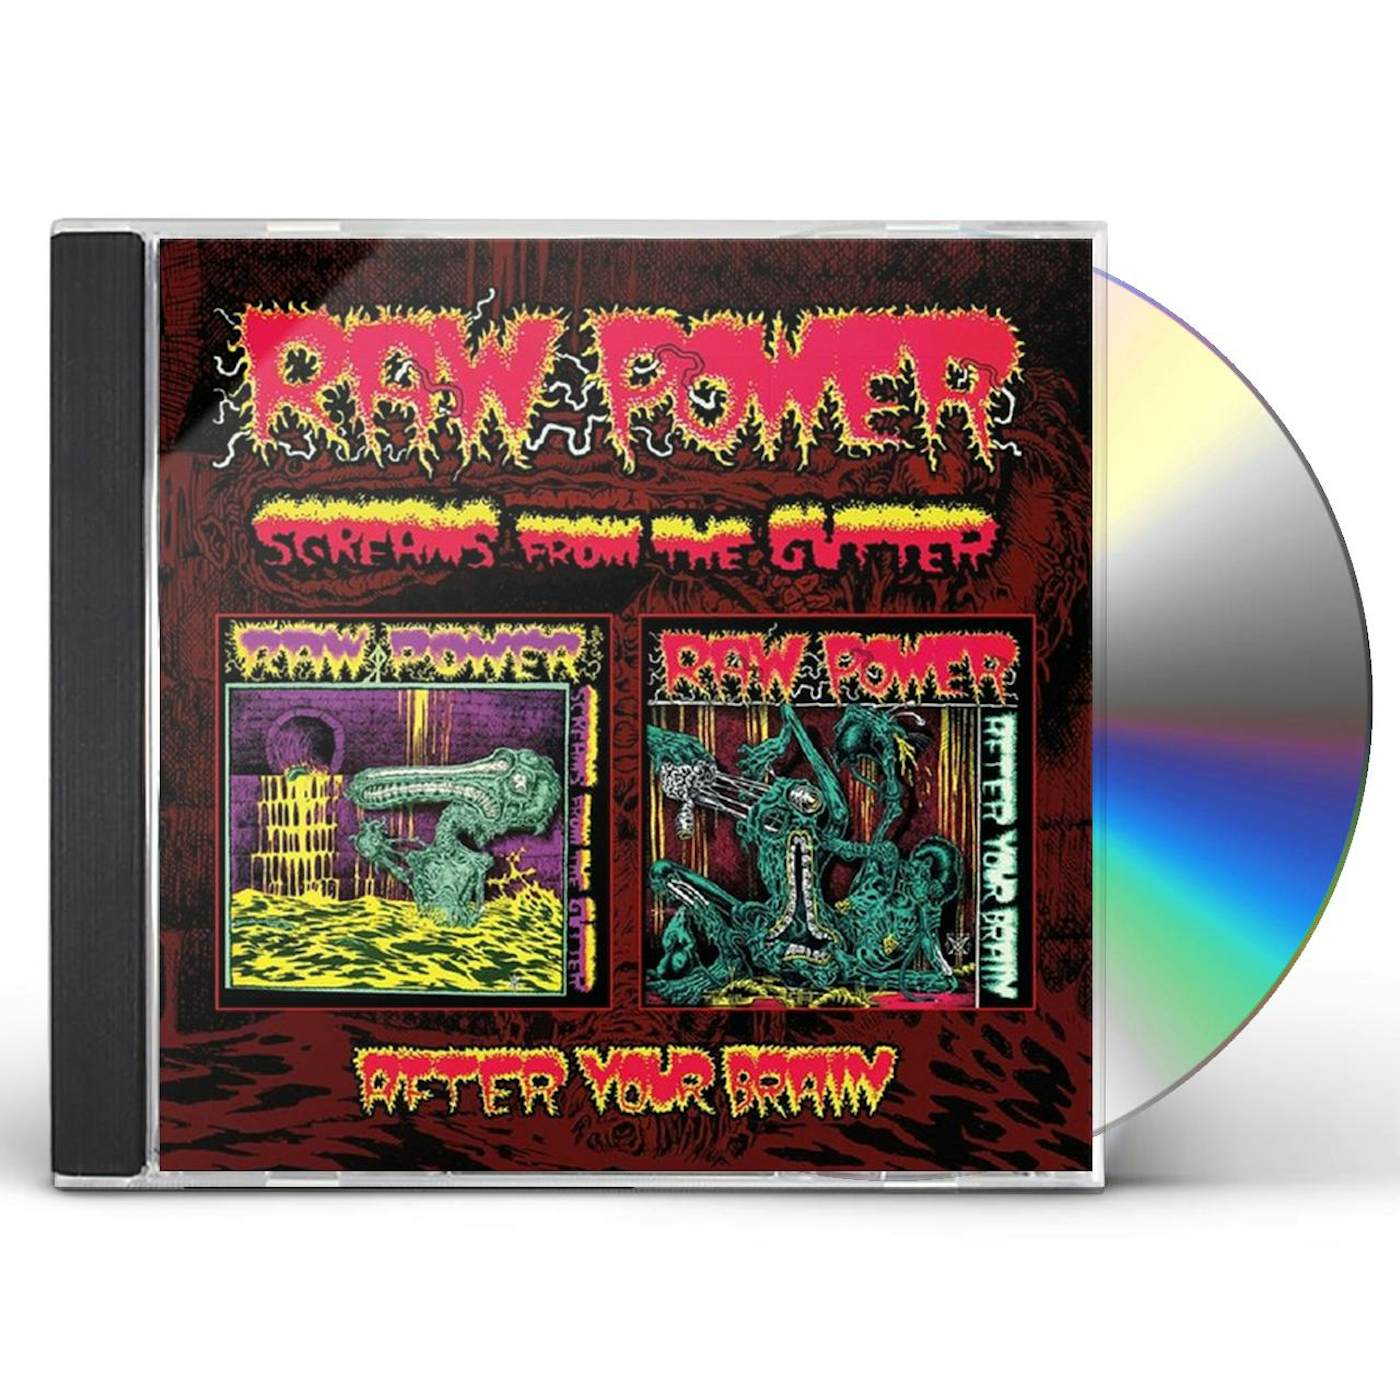 Raw Power SCREAMS FROM THE GUTTER / AFTER YOUR BRAIN CD